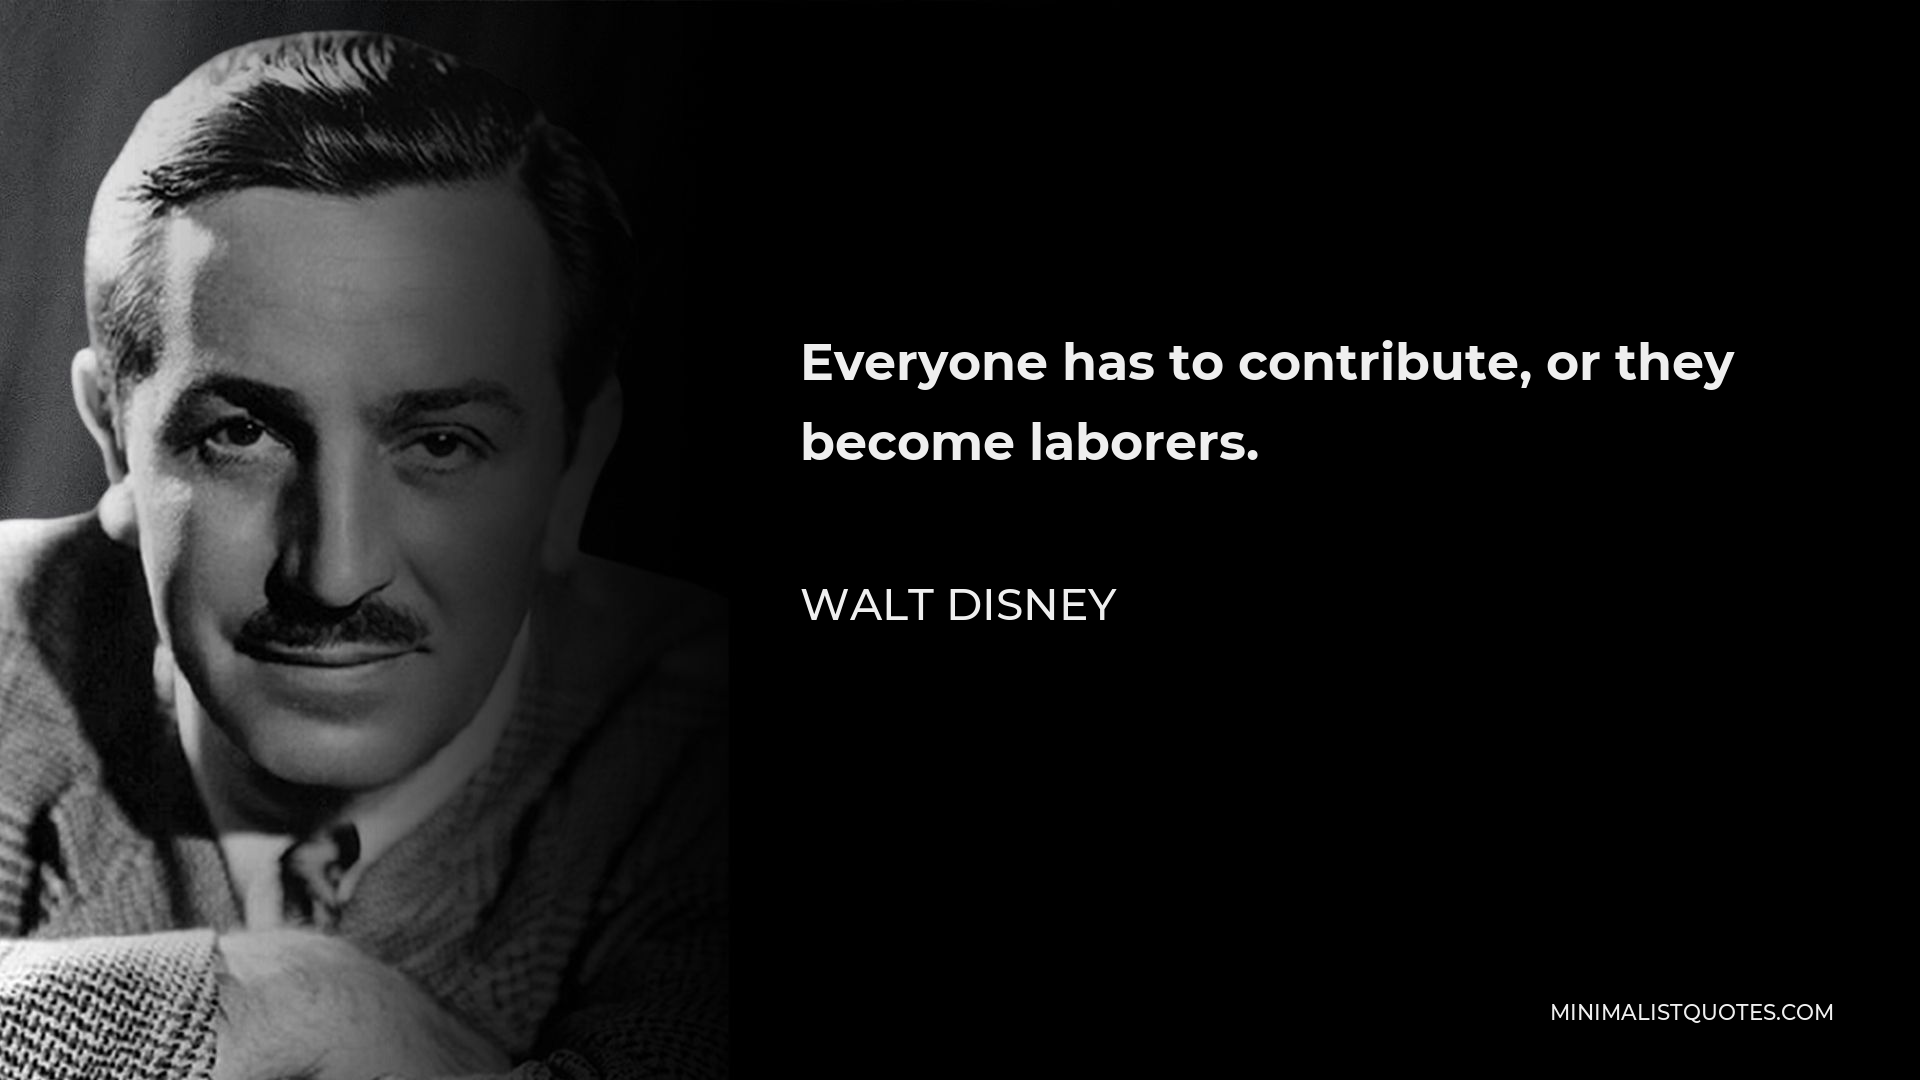 Walt Disney Quote - Everyone has to contribute, or they become laborers.